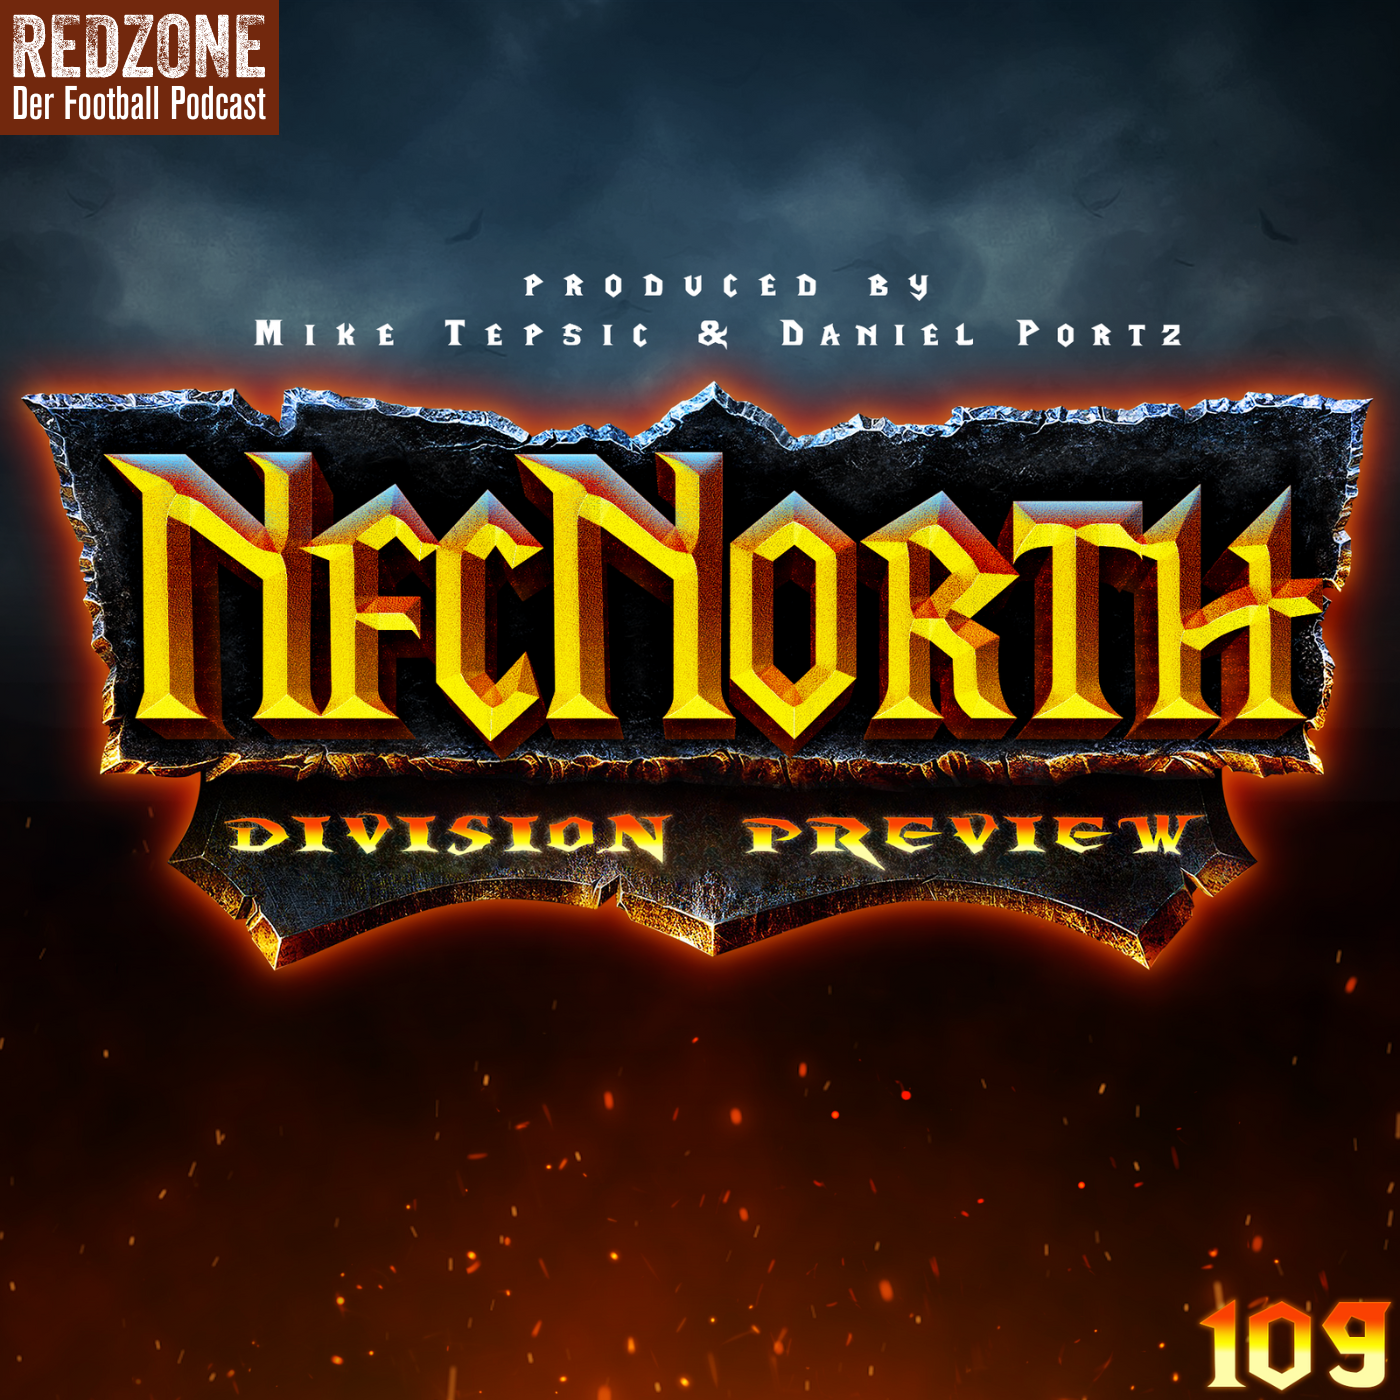 Division Preview 2022: NFC North